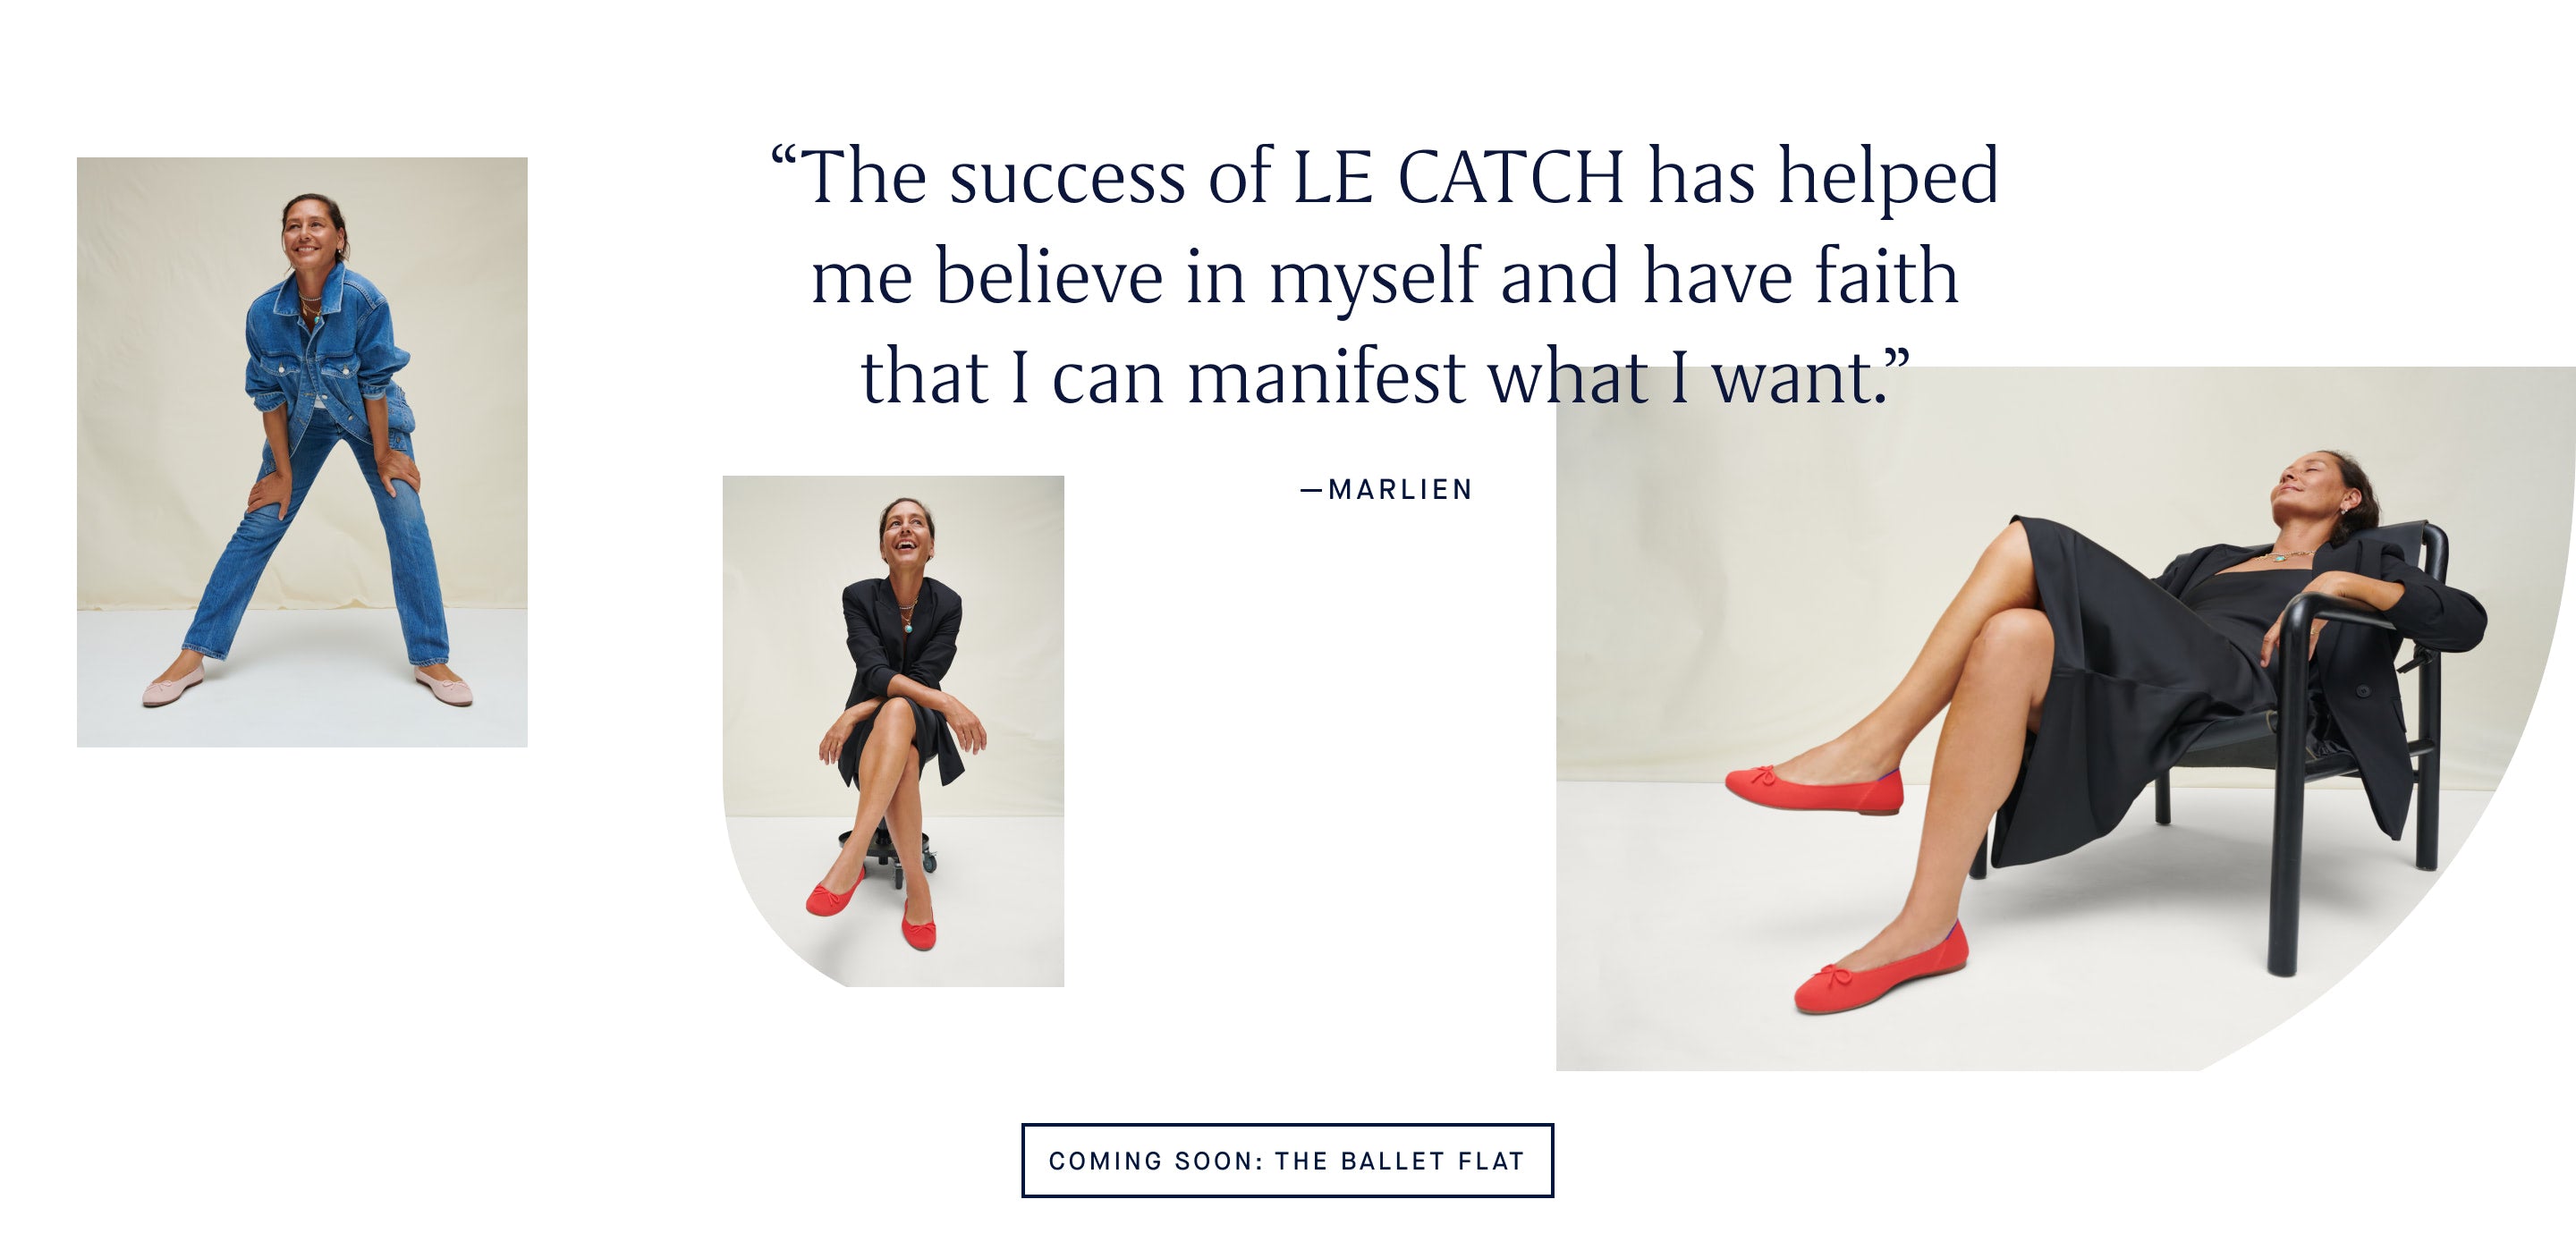 “The success of LE CATCH has helped me believe in myself and have faith that I can manifest what I want.” -MARLIEN